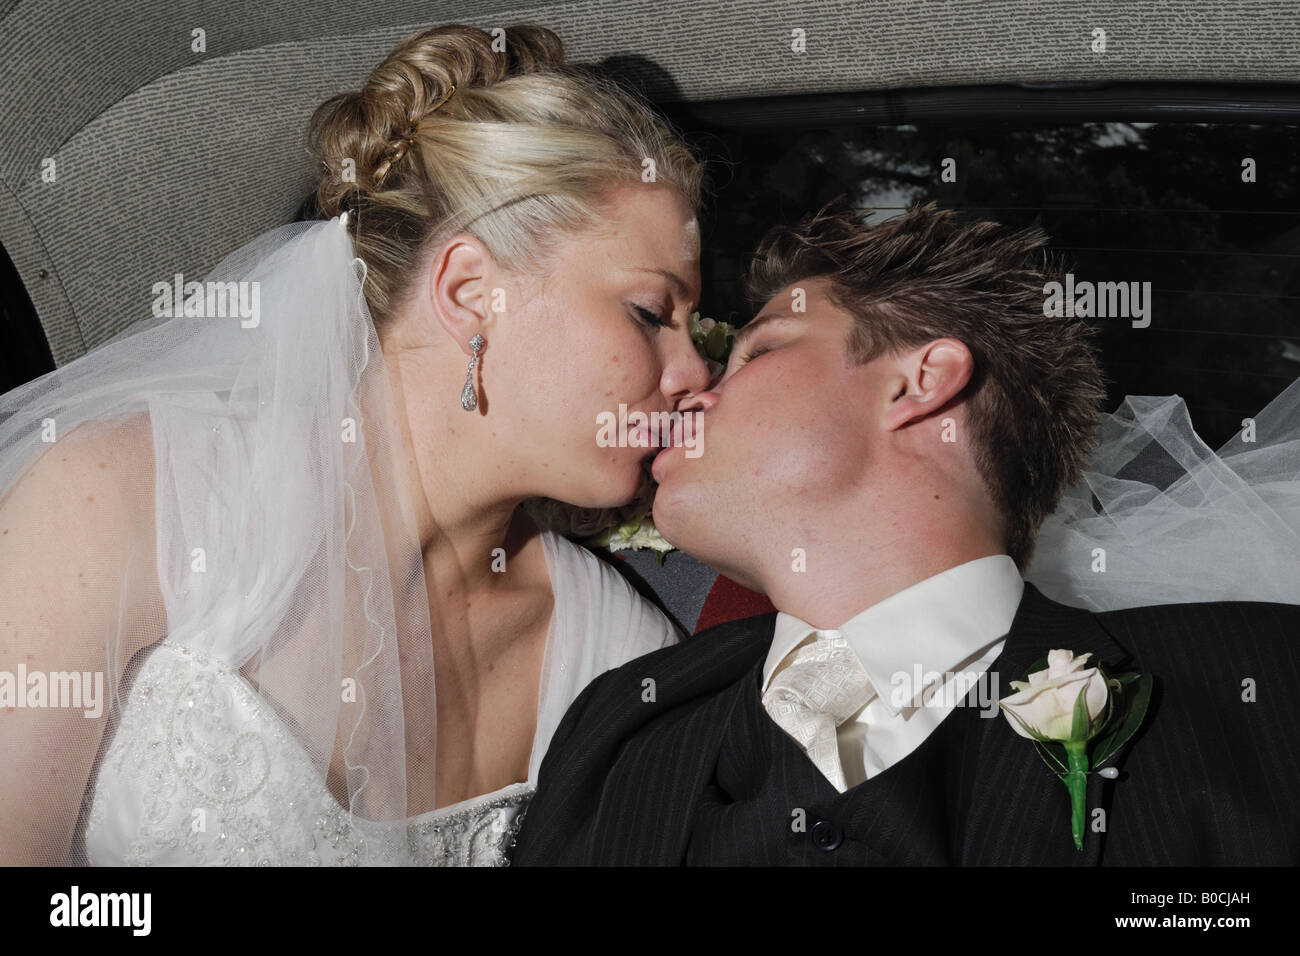 Bride and groom kissing in a wedding car Stock Photo